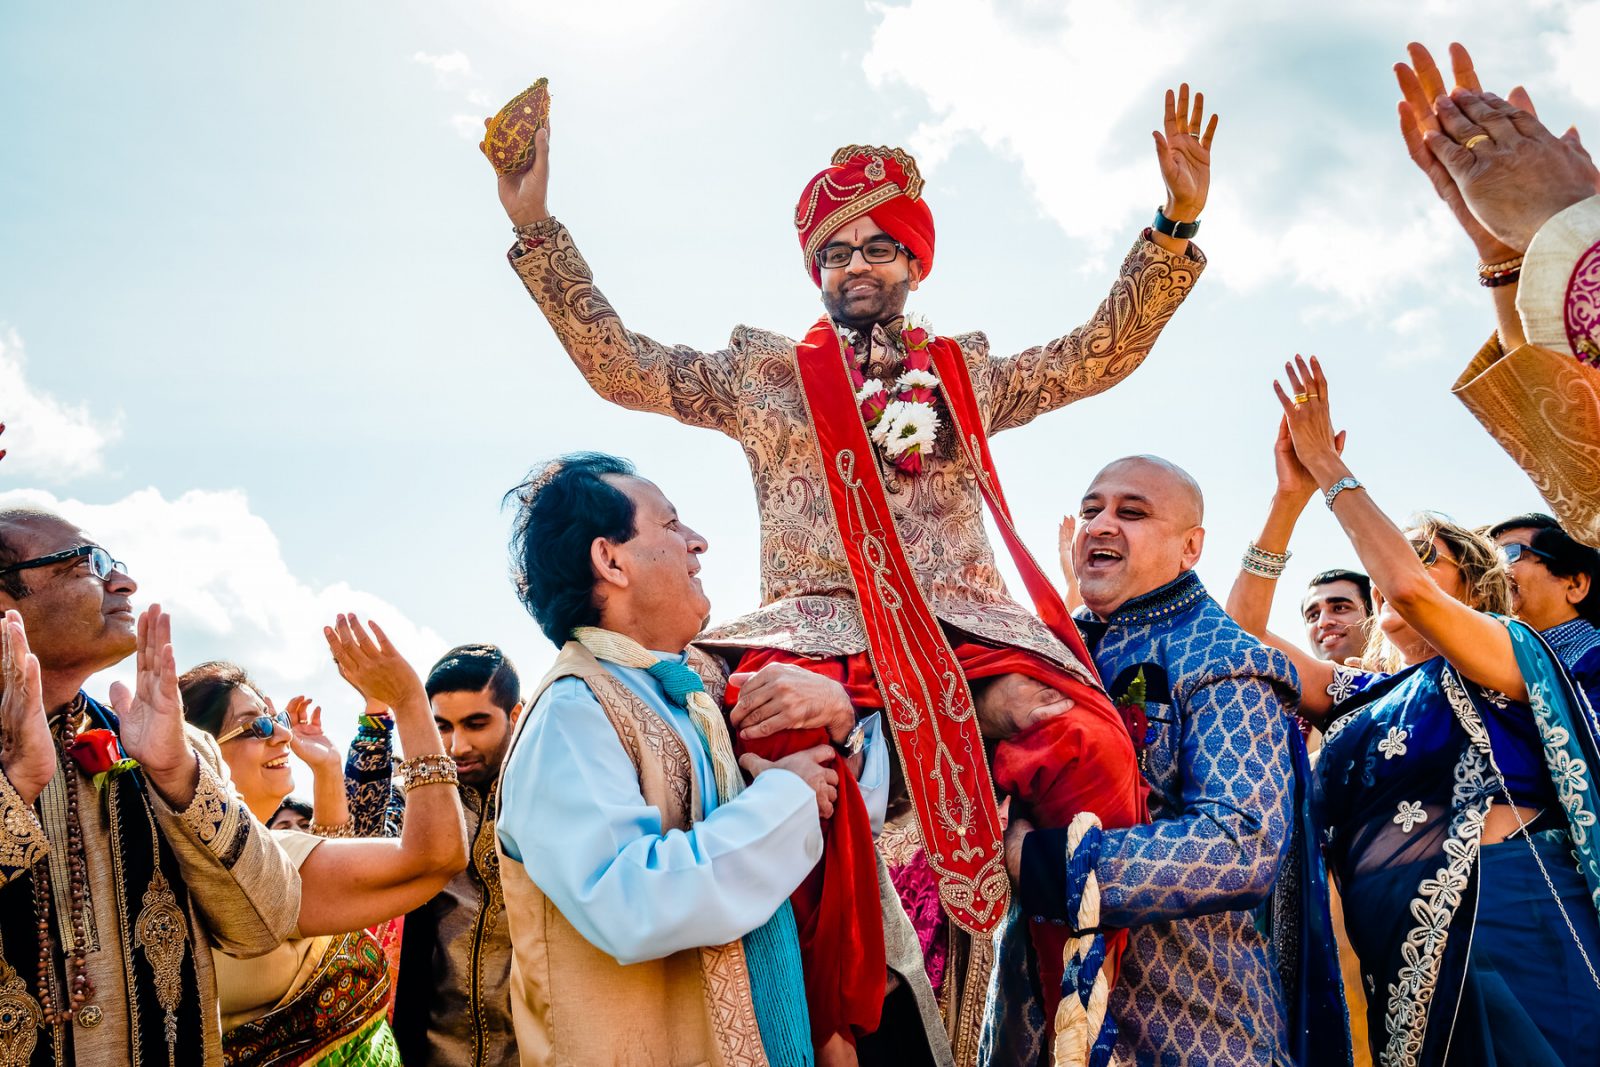 Indian Groom being lifted up by family at wedding